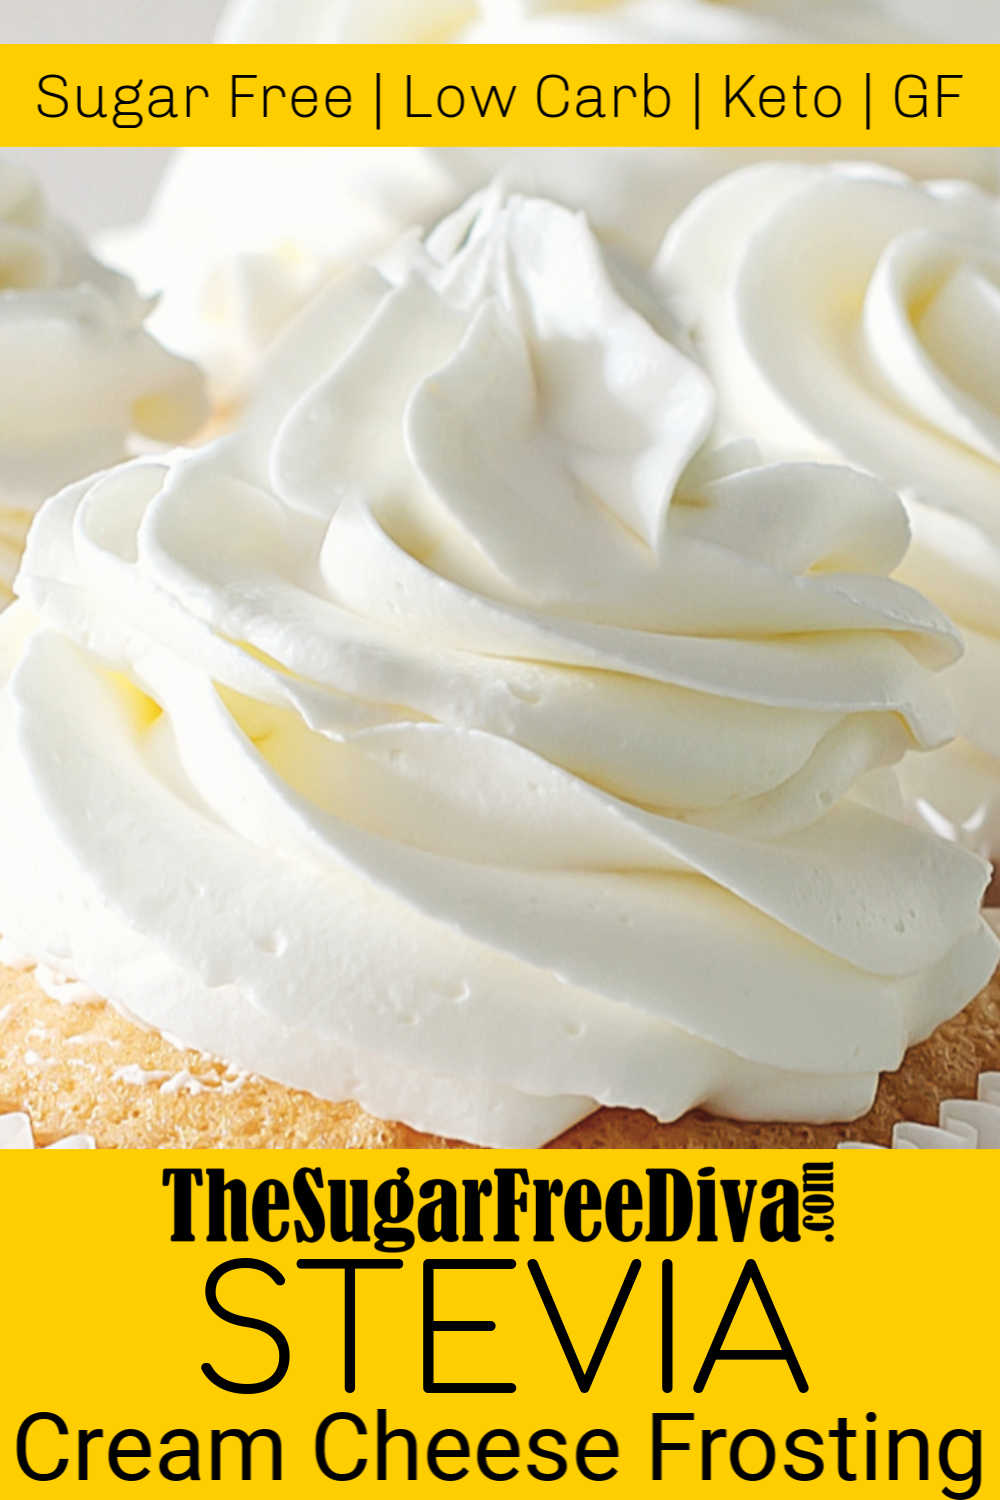 Stevia Cream Cheese Frosting